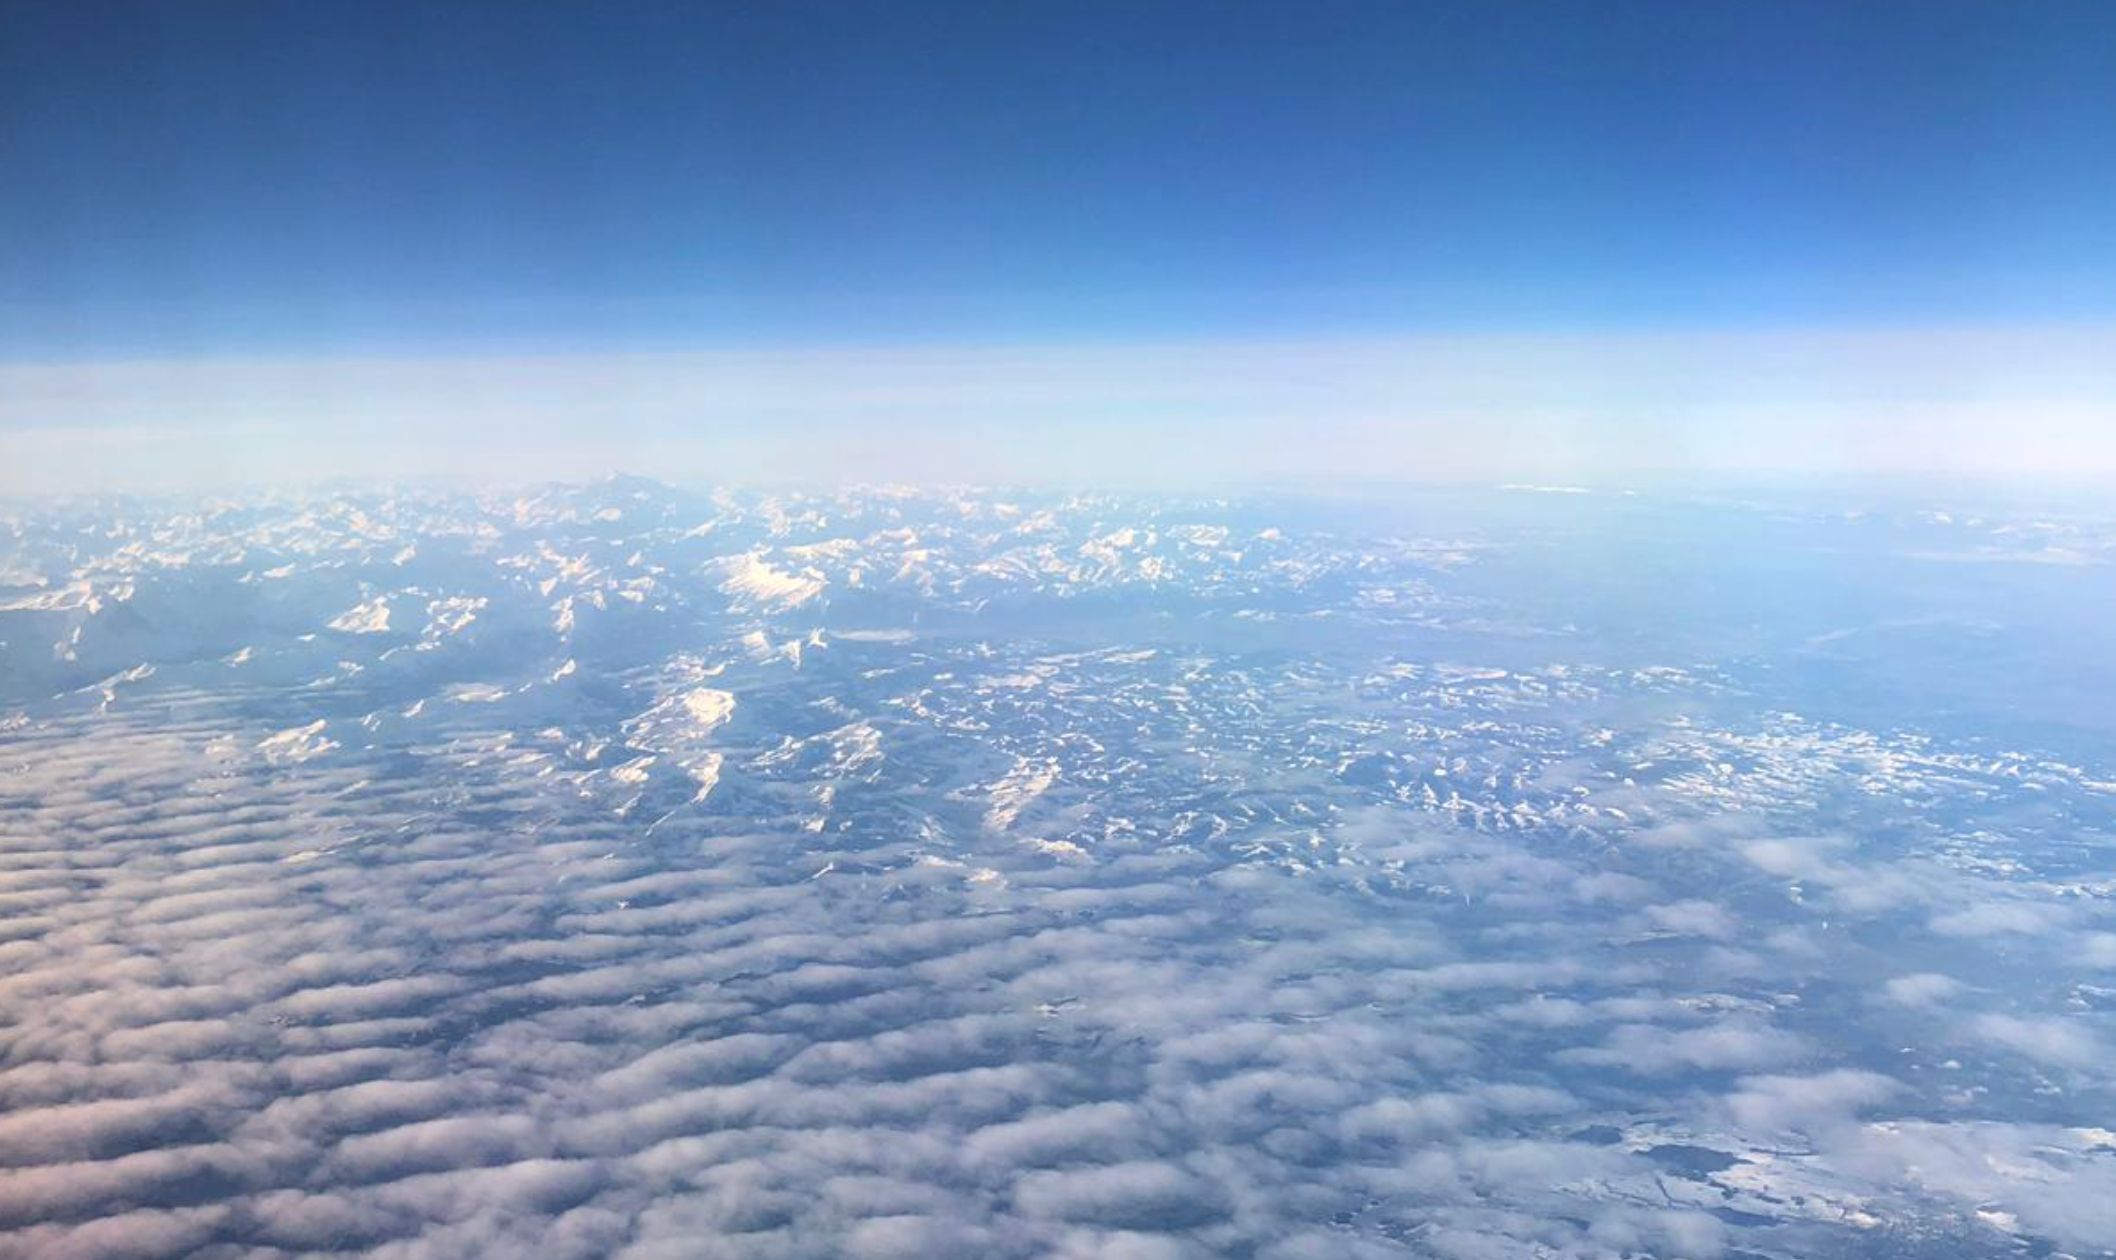 The Alps in sight, snow far into Germany